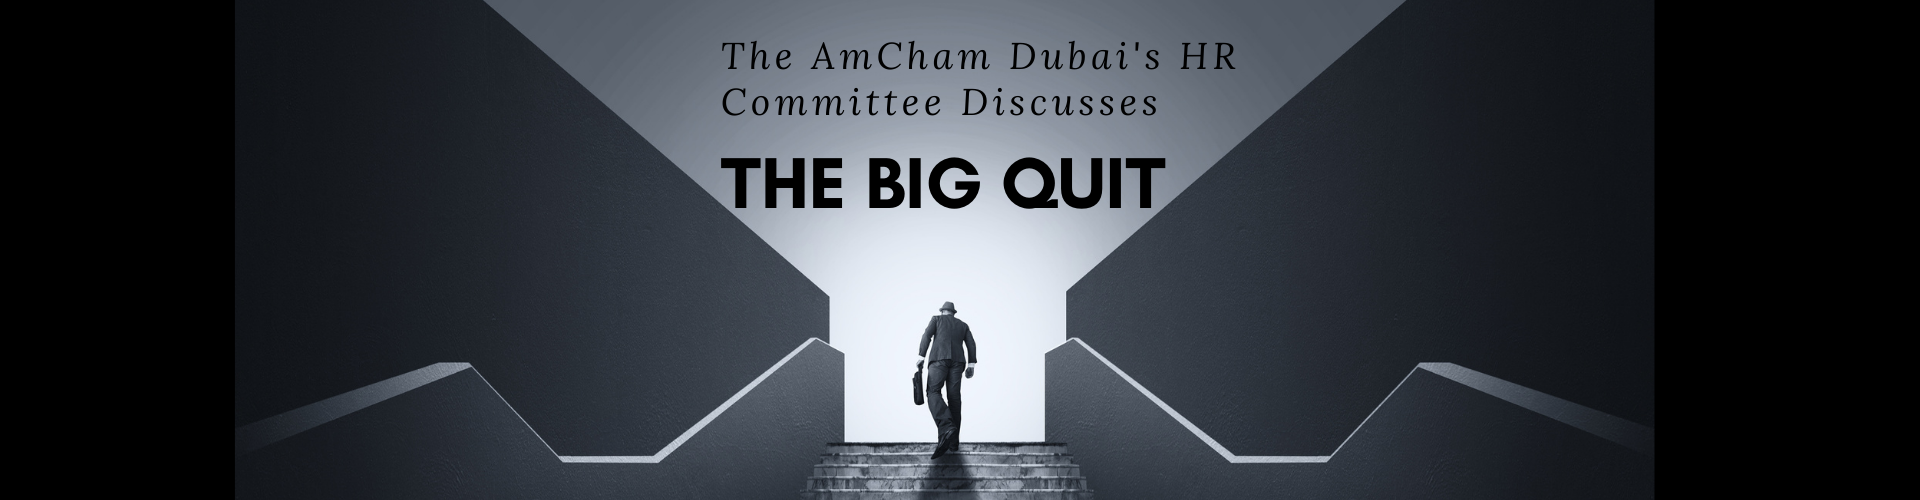 thumbnails HR Committee Program - The Big Quit